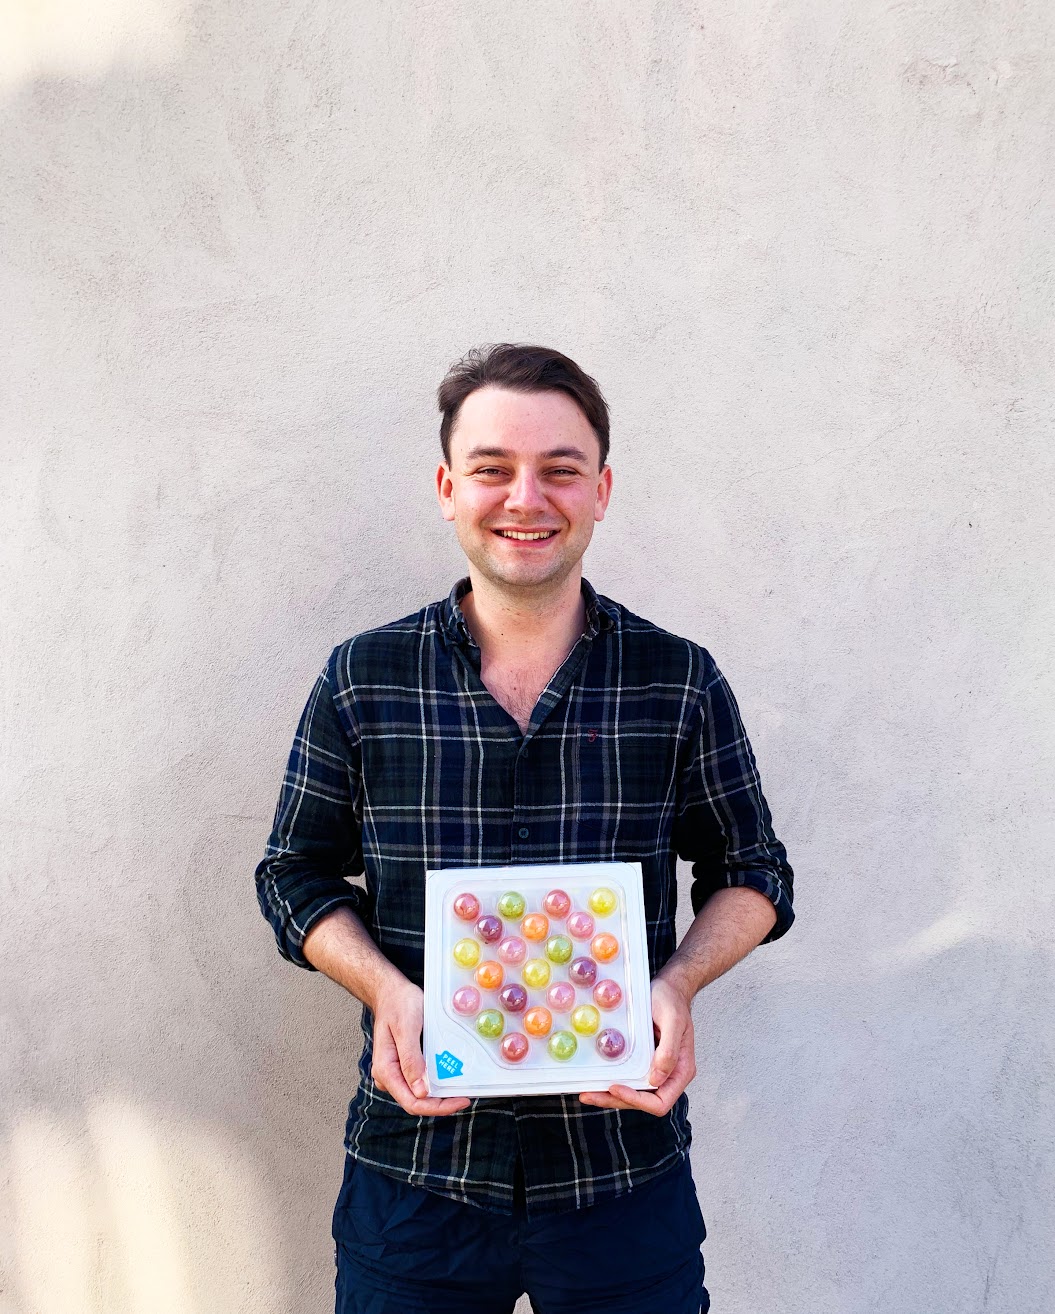 It began when then 24-year-old student Lewis spent a month in his grandma’s care home to find a solution to her lack of water intake, resulting in the invention of the very first Jelly Drops.